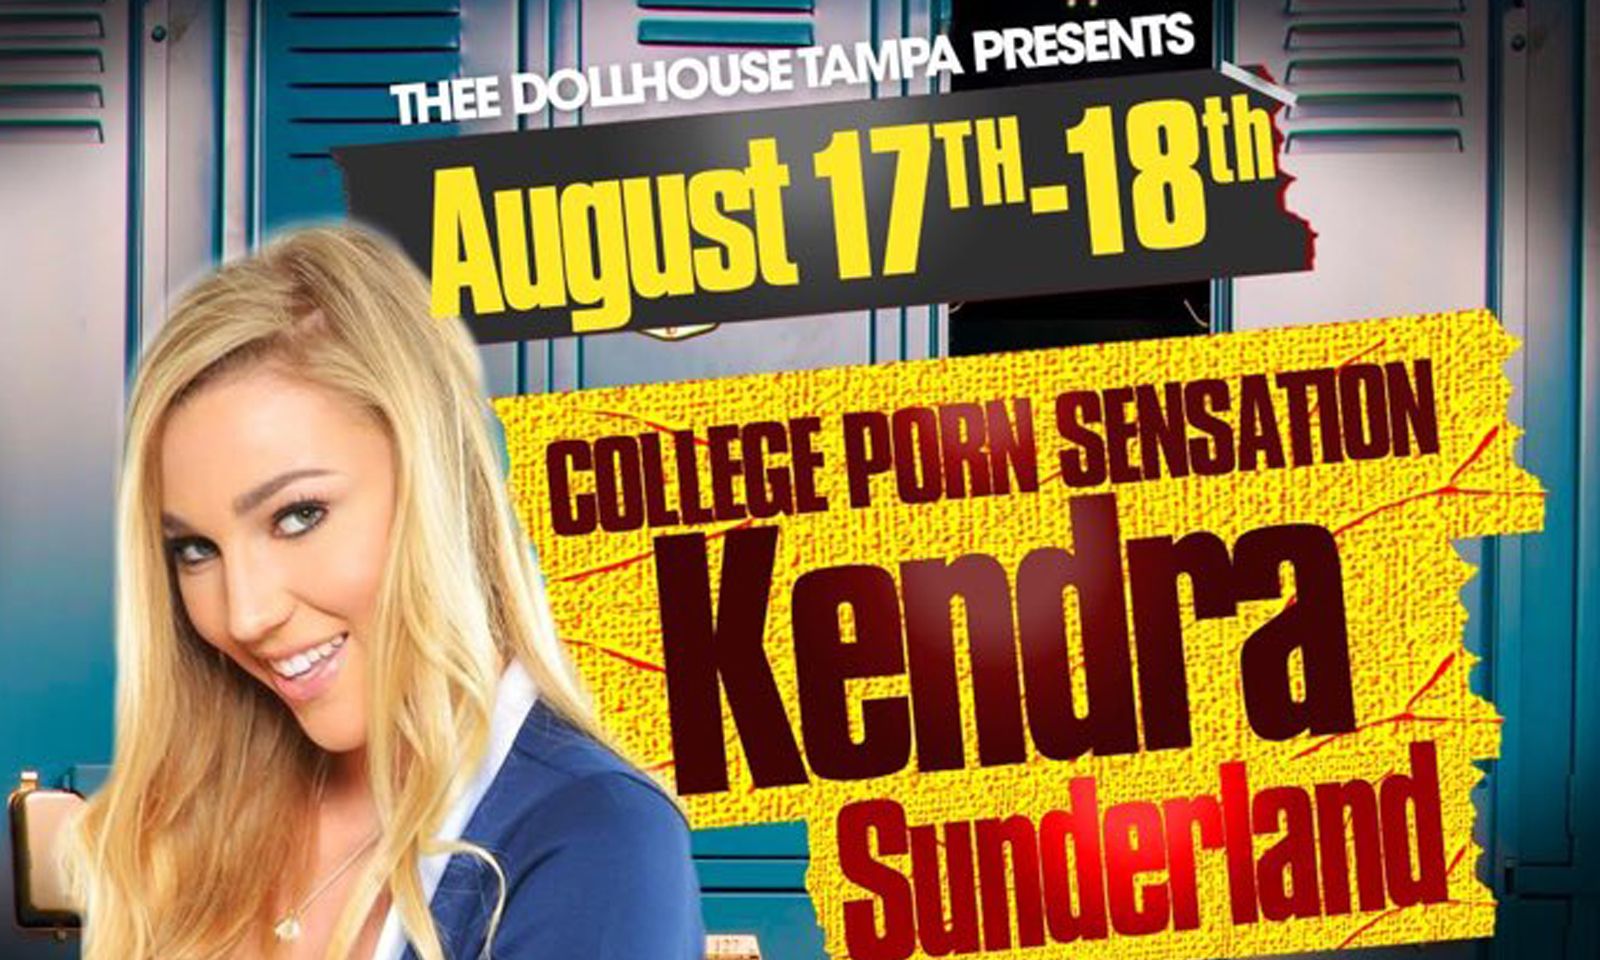 Kendra Sunderland to Dance at Thee Dollhouse Tampa